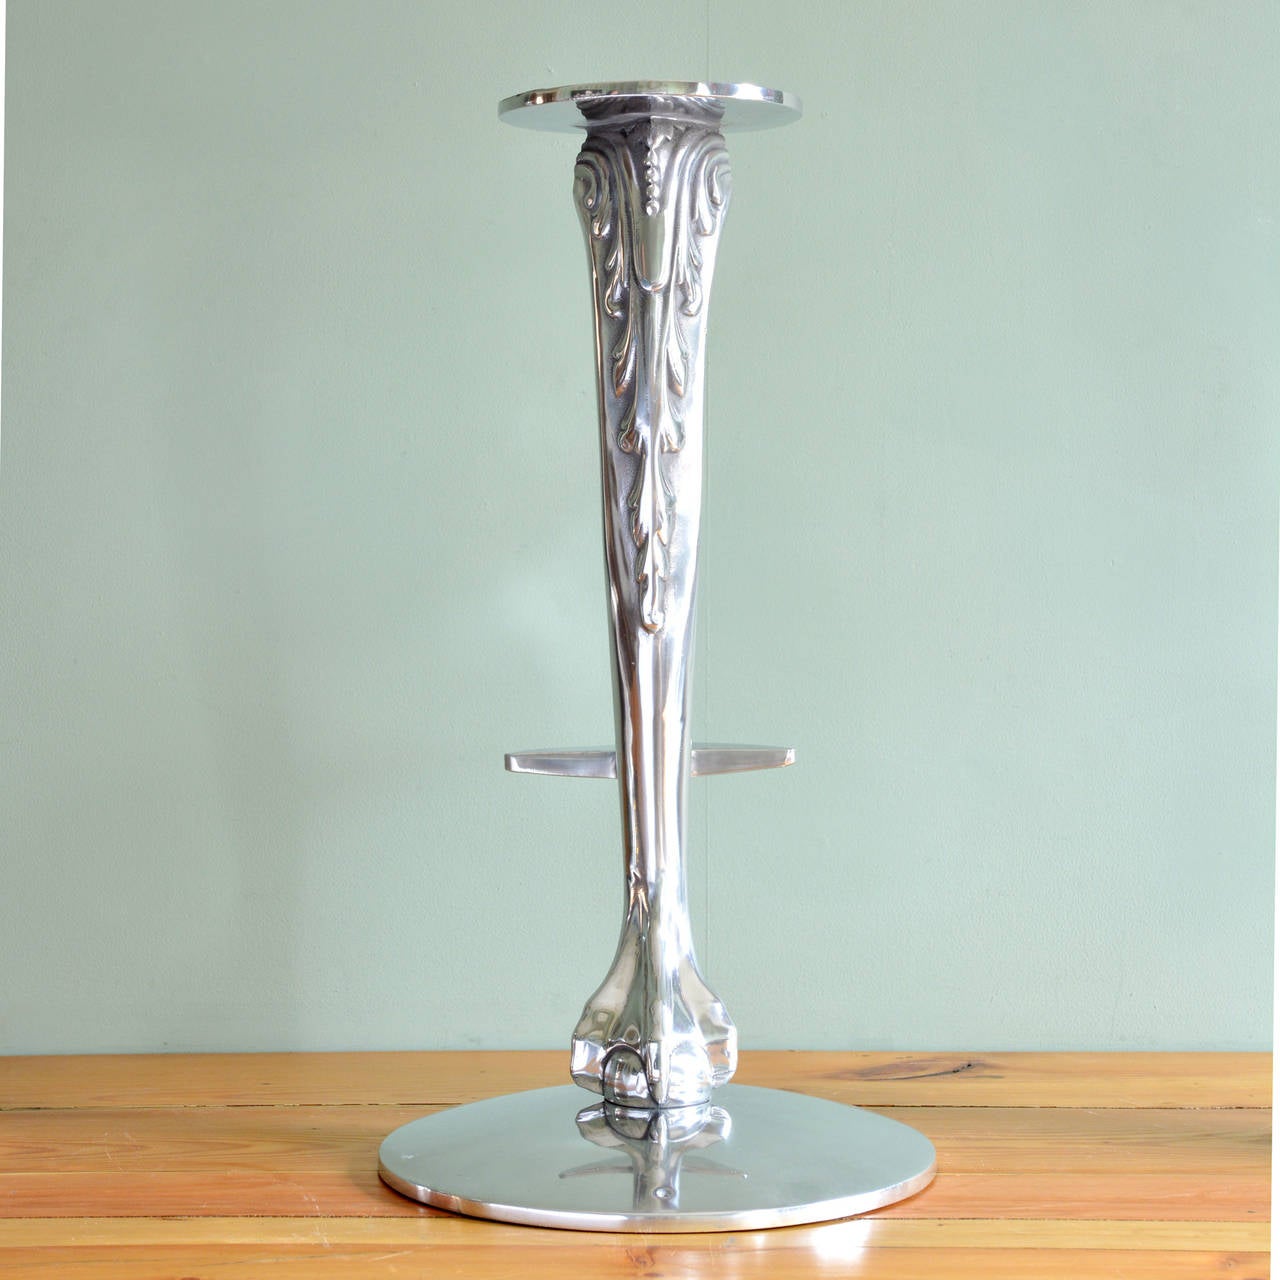 Cast and polished aluminium bar stool bases, of claw and ball design with footrest. Require a padded upholstered seat.

Available to view at Brunswick House, London.

Measures: Height 67.5 cm, base diameter 36 cm.